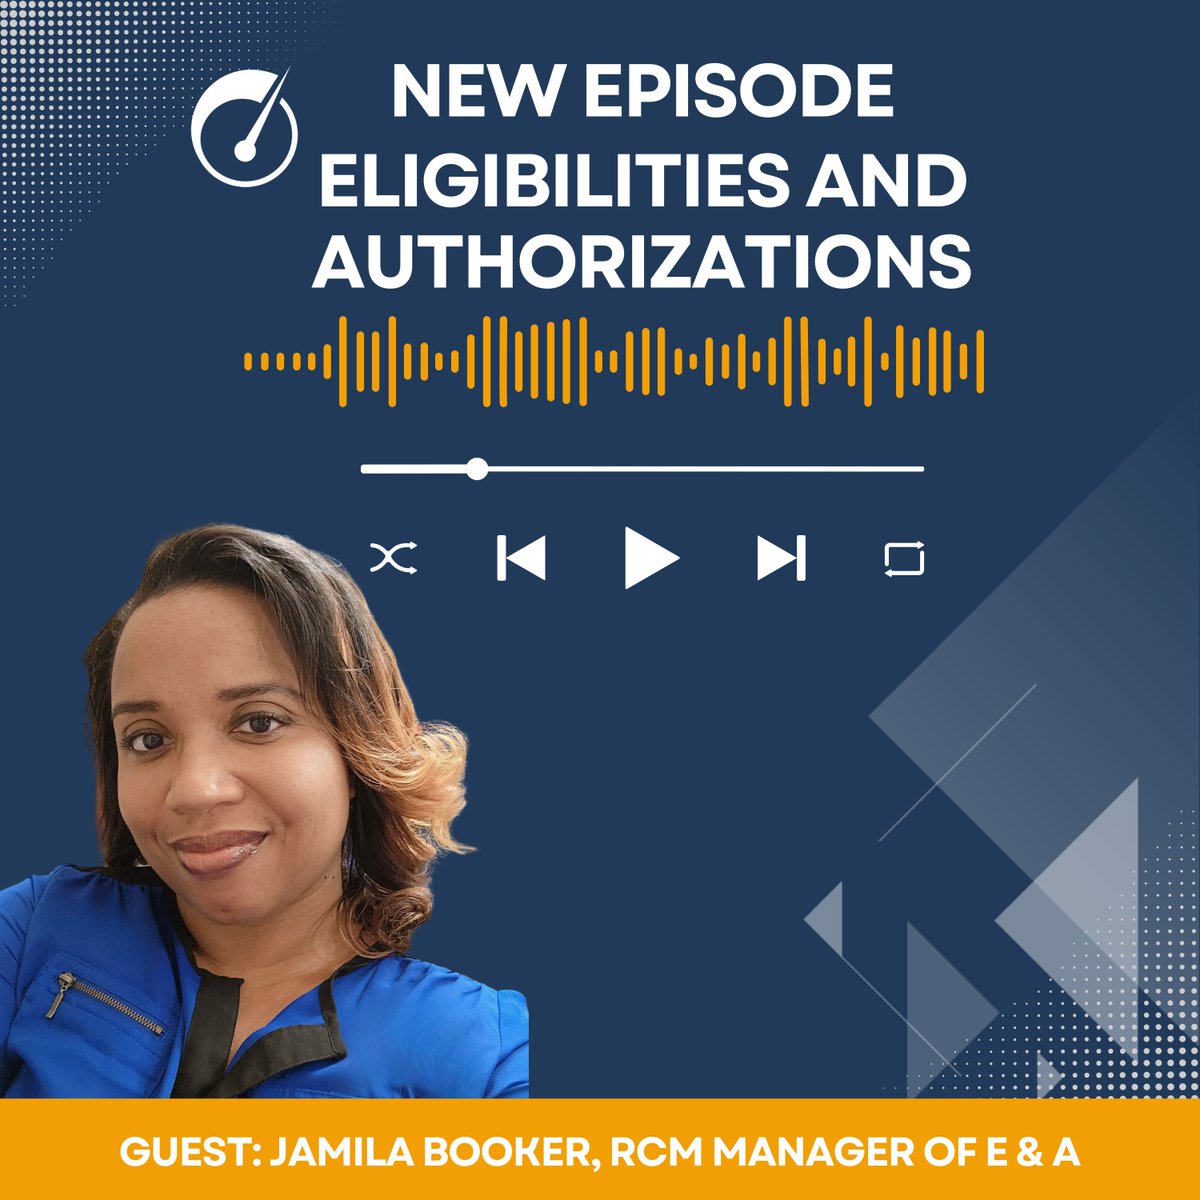 NEW PODCAST Episode! Discuss the importance of proper authorization and eligibility processes for home health agencies. #homehealthrevealed #homehealth #hospice #eligibilities #authorizations #insurancerequirements #rcm episodes.castos.com/654be5d160e358…